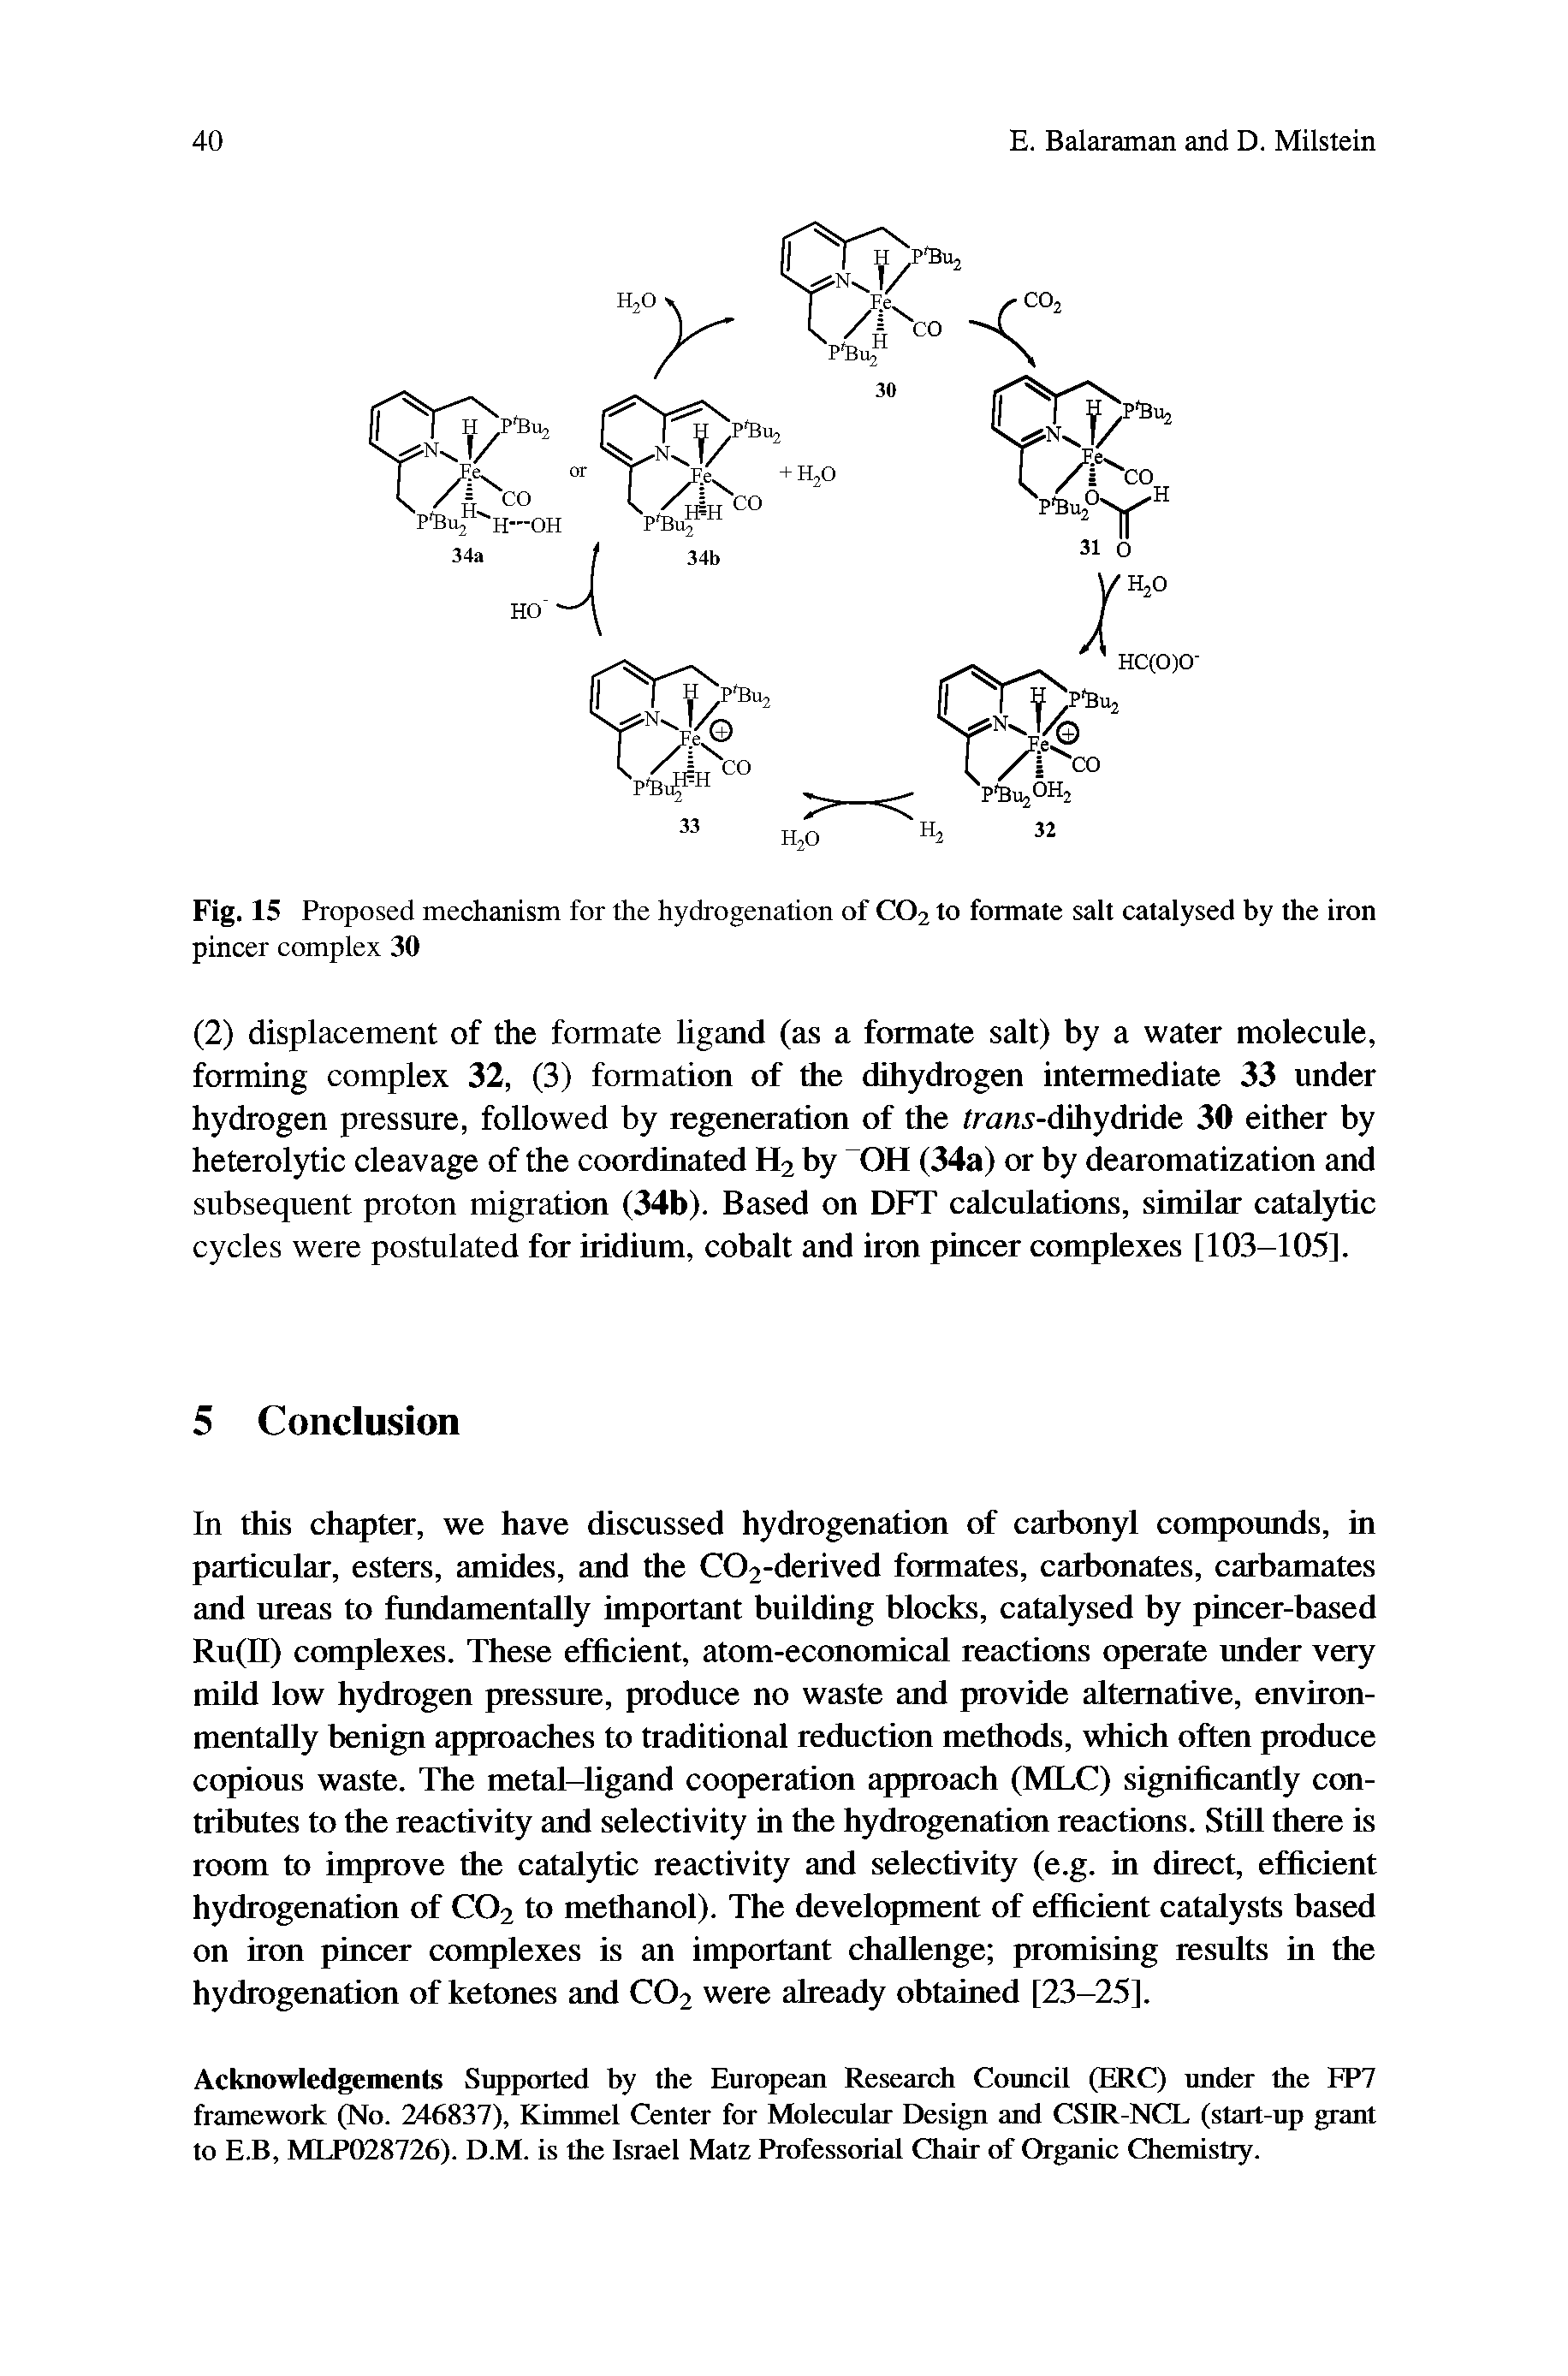 Fig. 15 Proposed mechanism for the hydrogenation of CO2 to formate salt catalysed by the iron pincer complex 30...